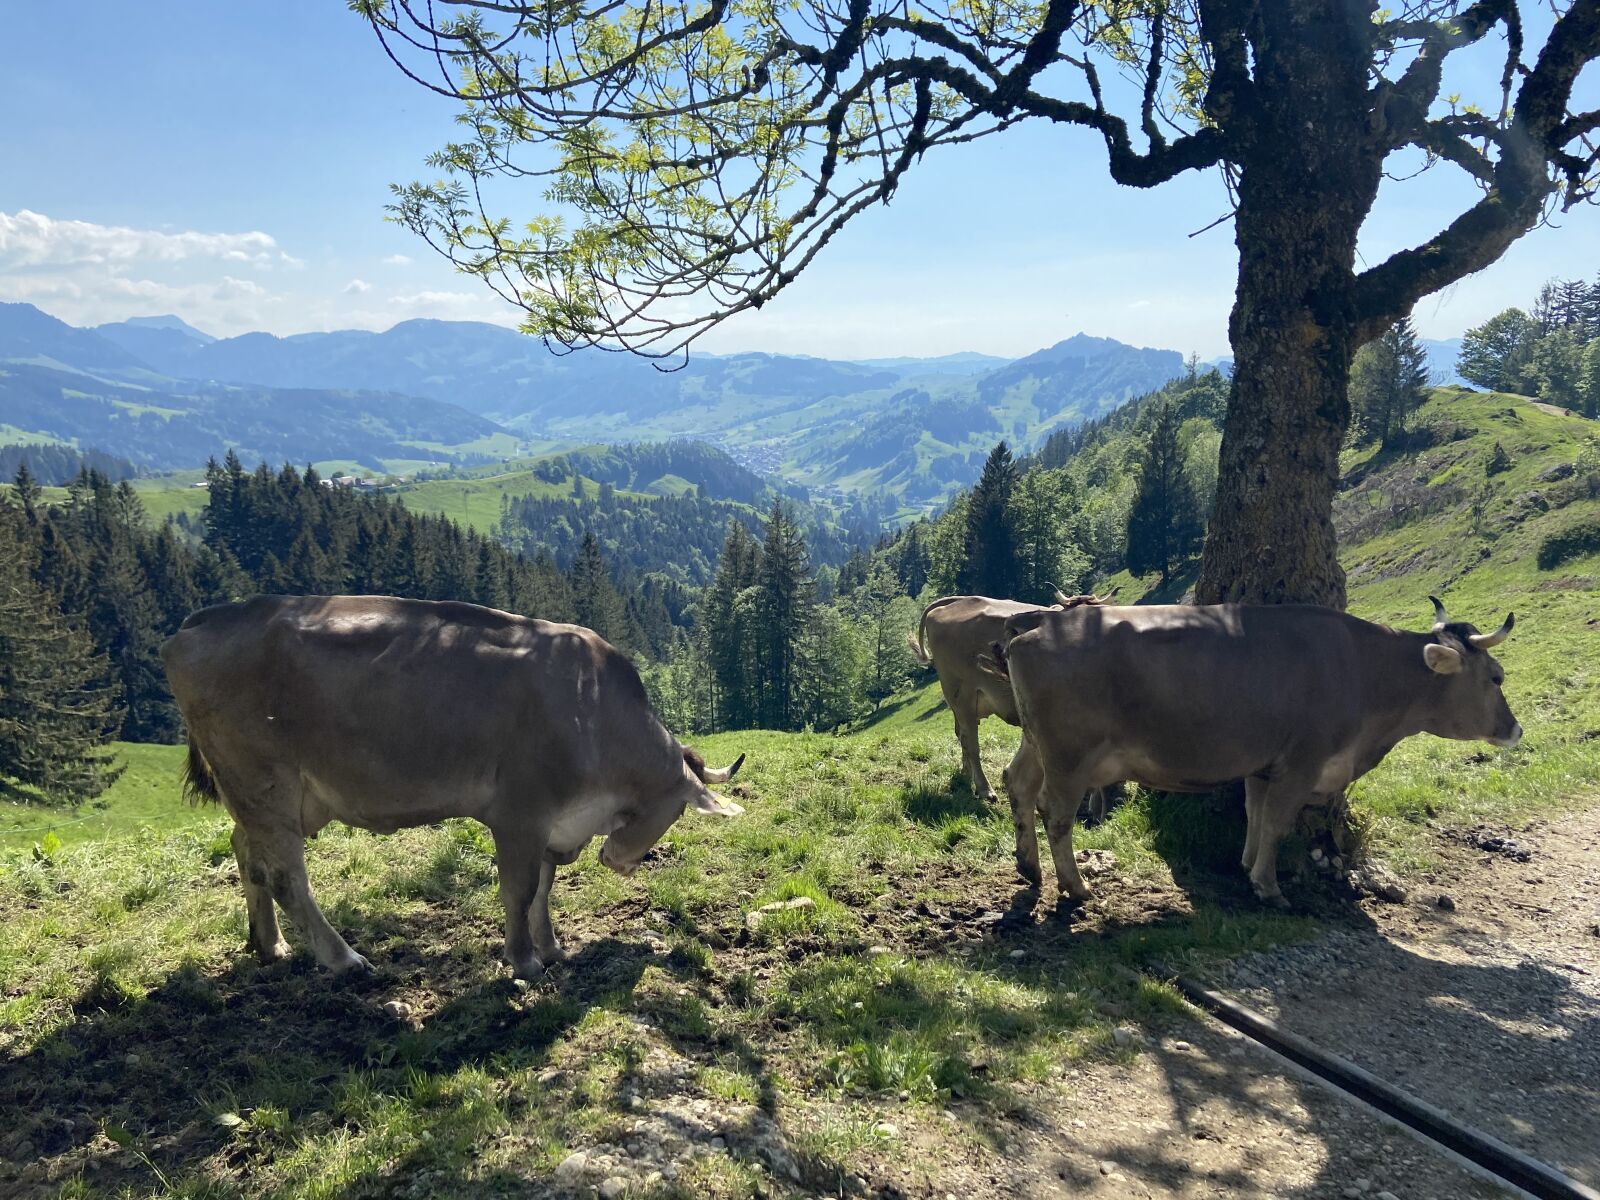 Apple iPhone 11 sample photo. Nature, mountains, cows photography